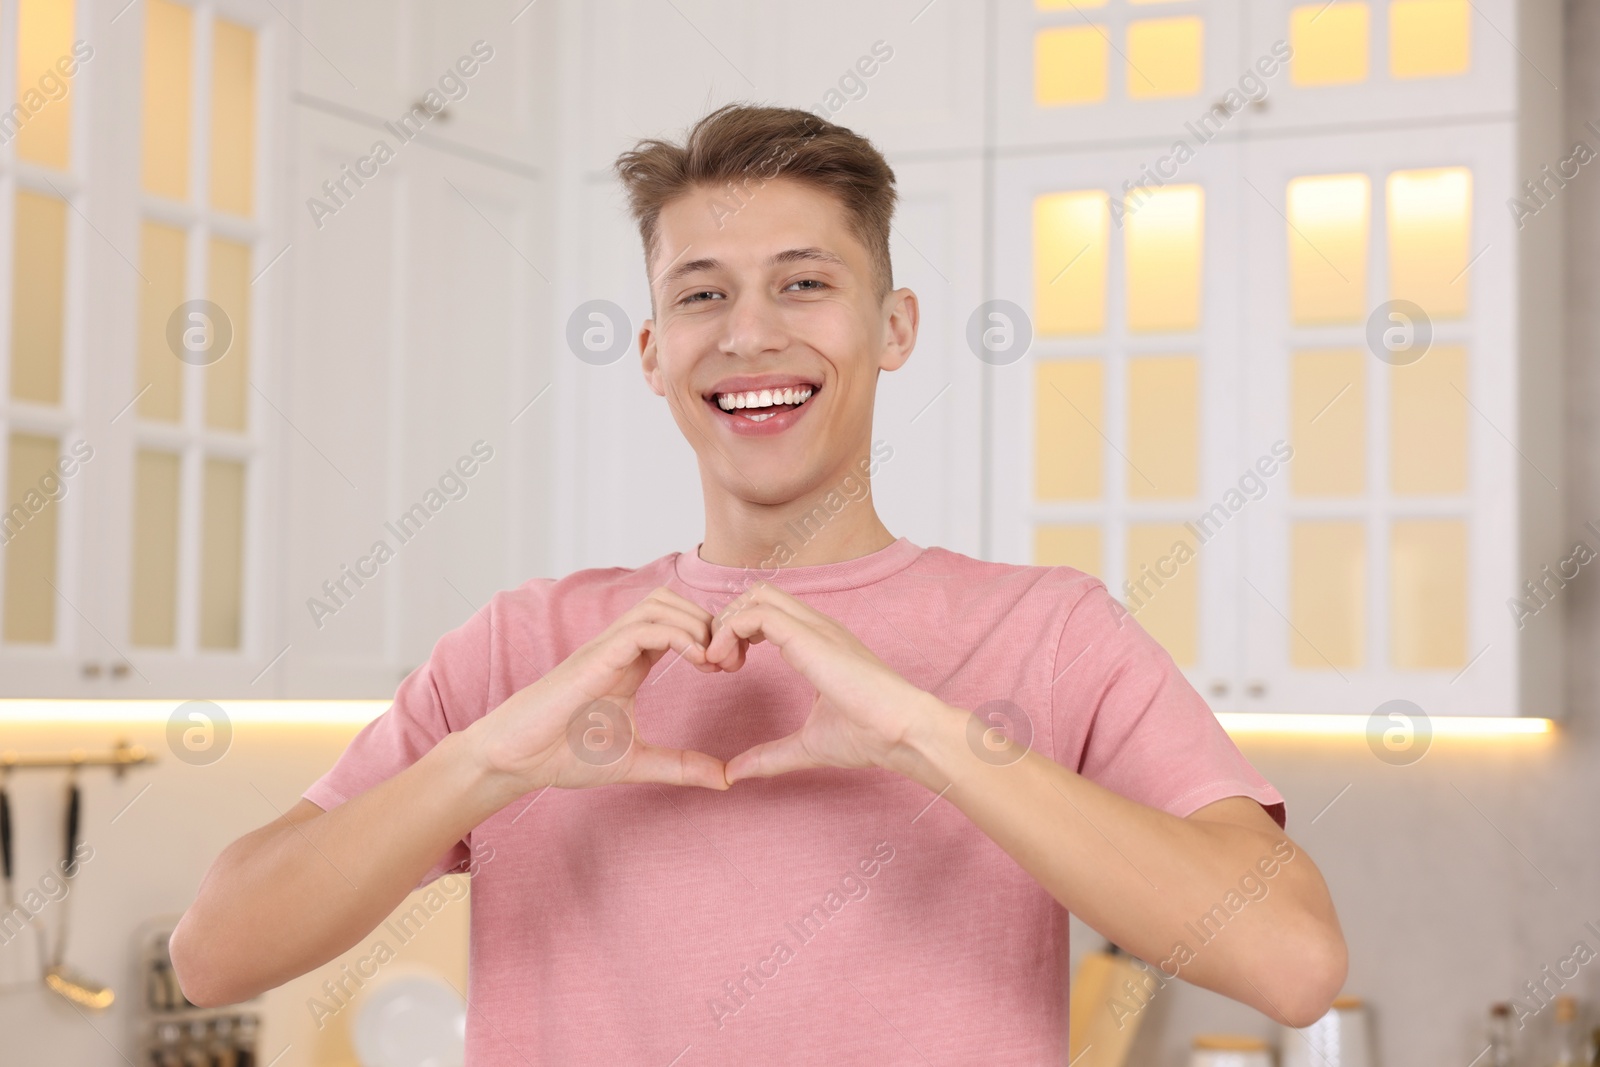 Photo of Happy man showing heart gesture with hands at home